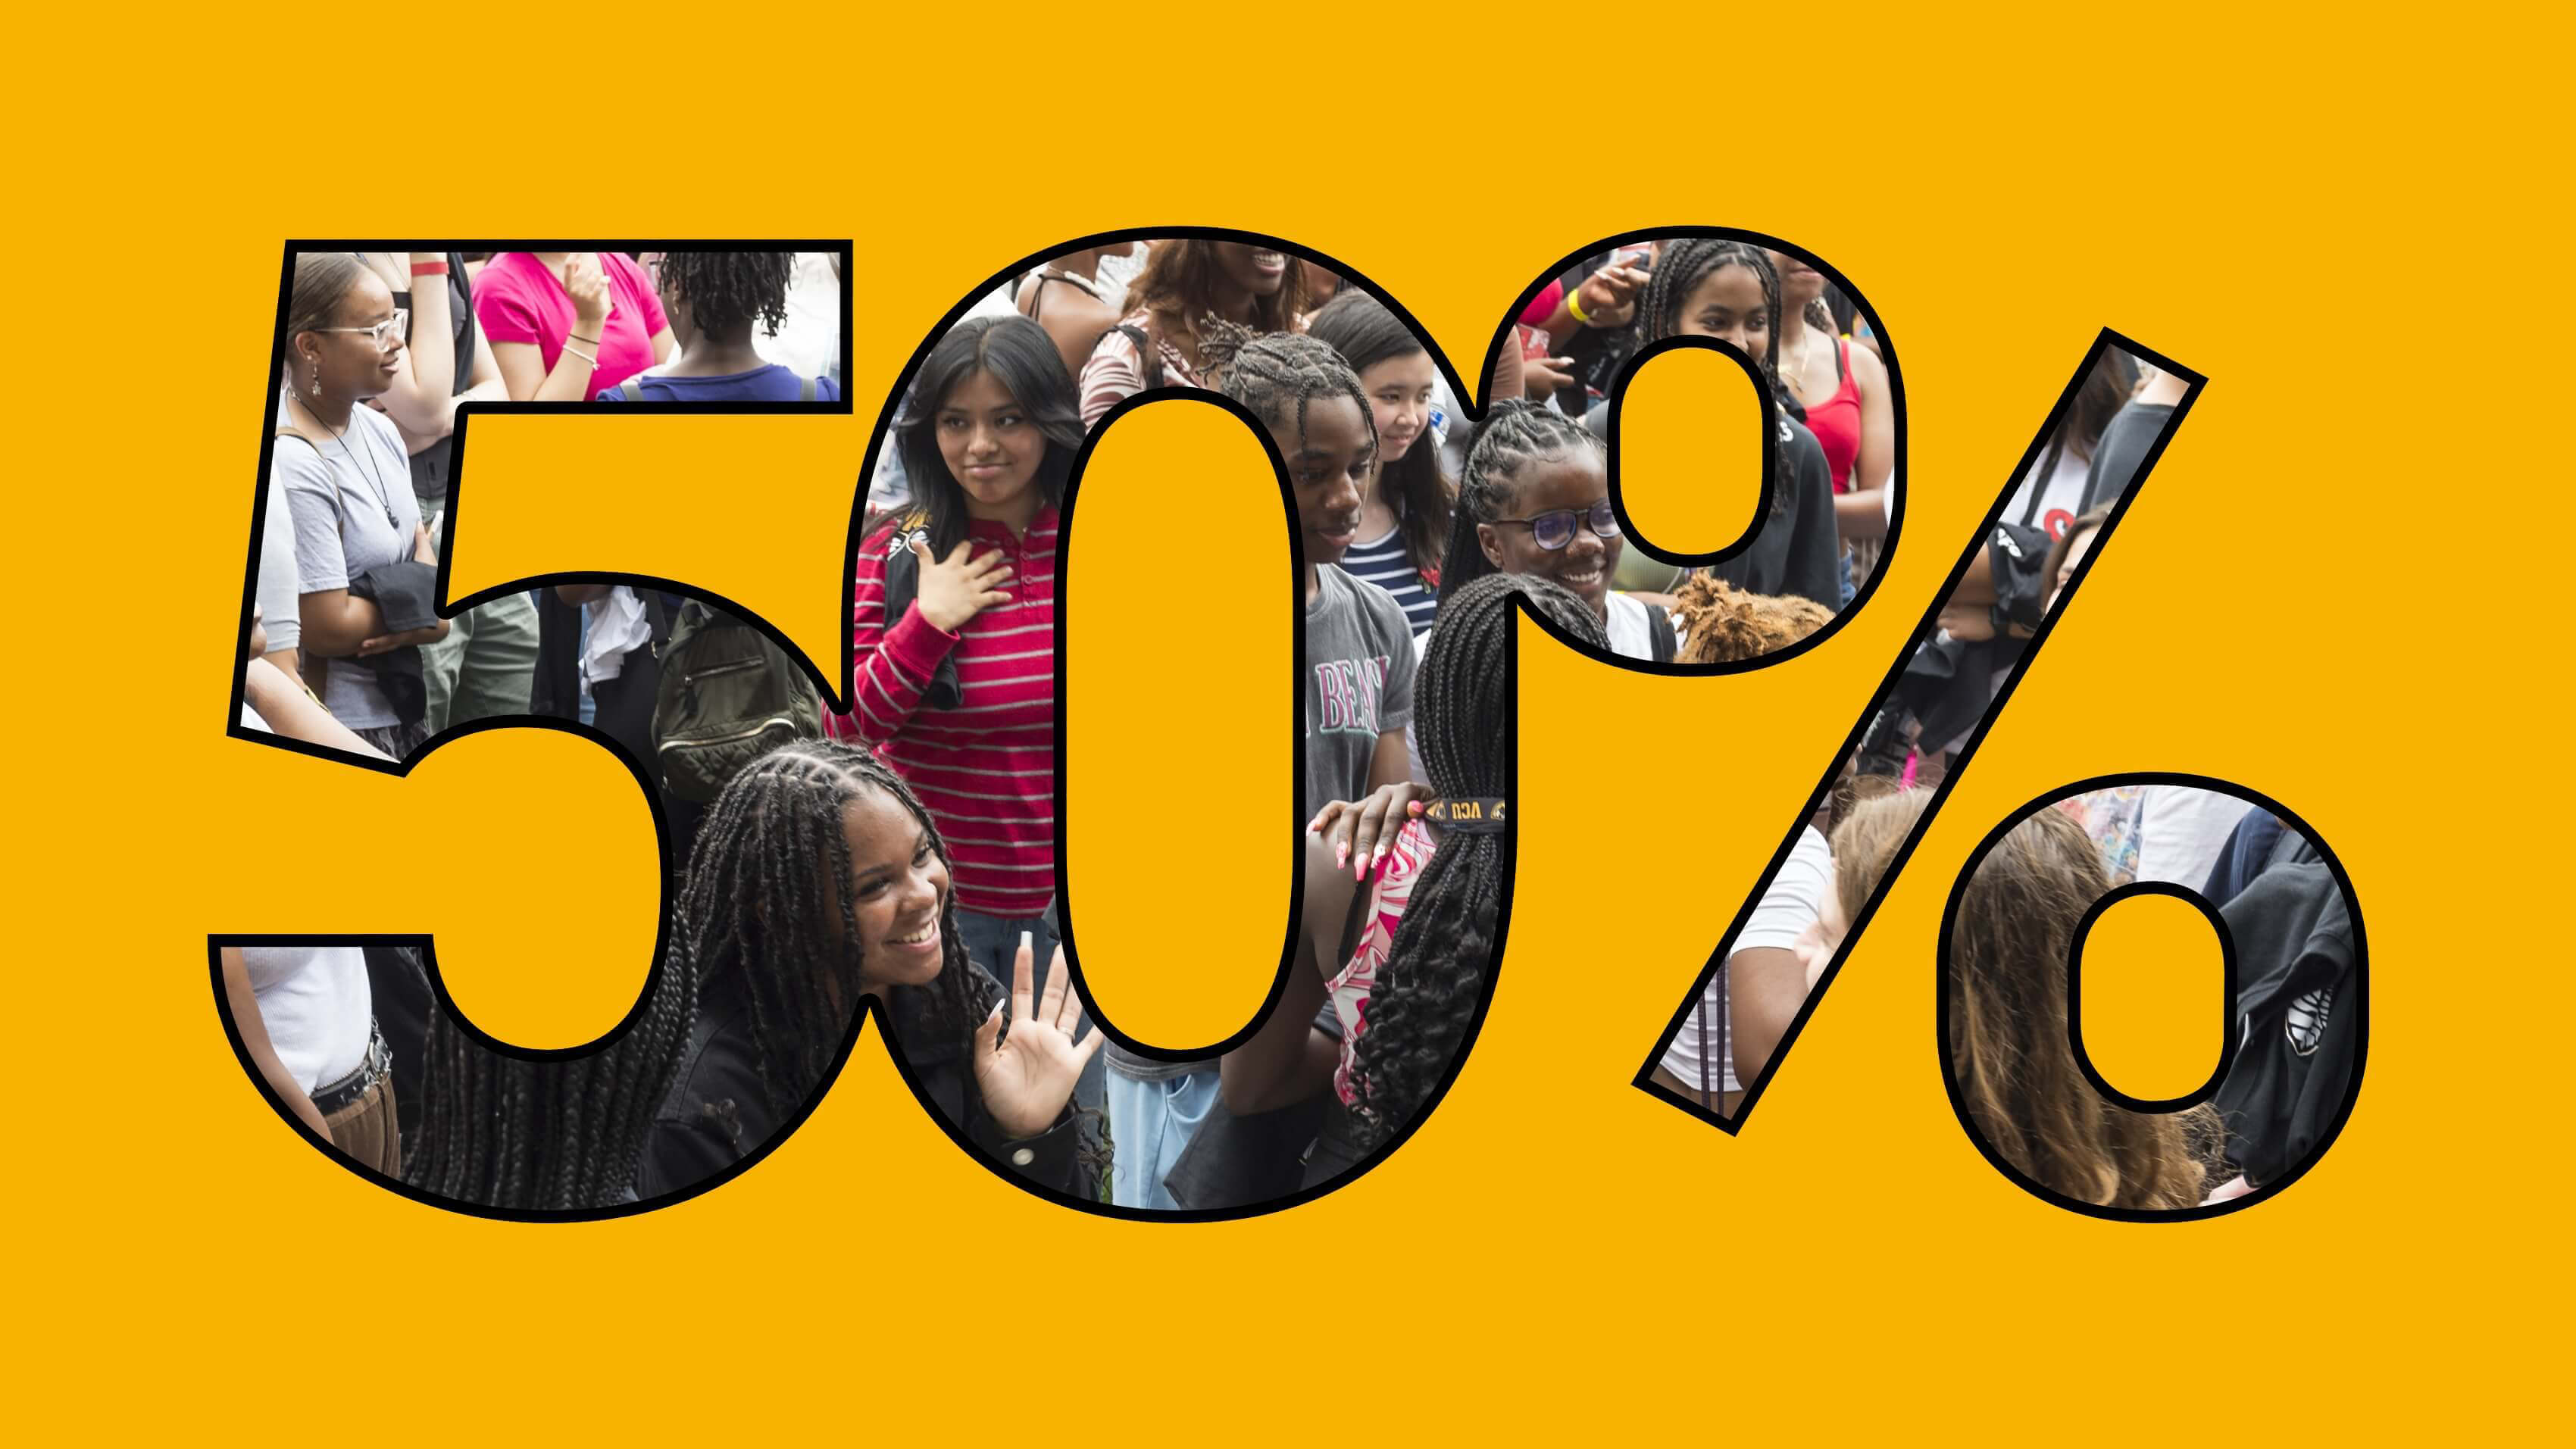 Large graphic image of the nuber 50 percent, filled by a photo of VCU students